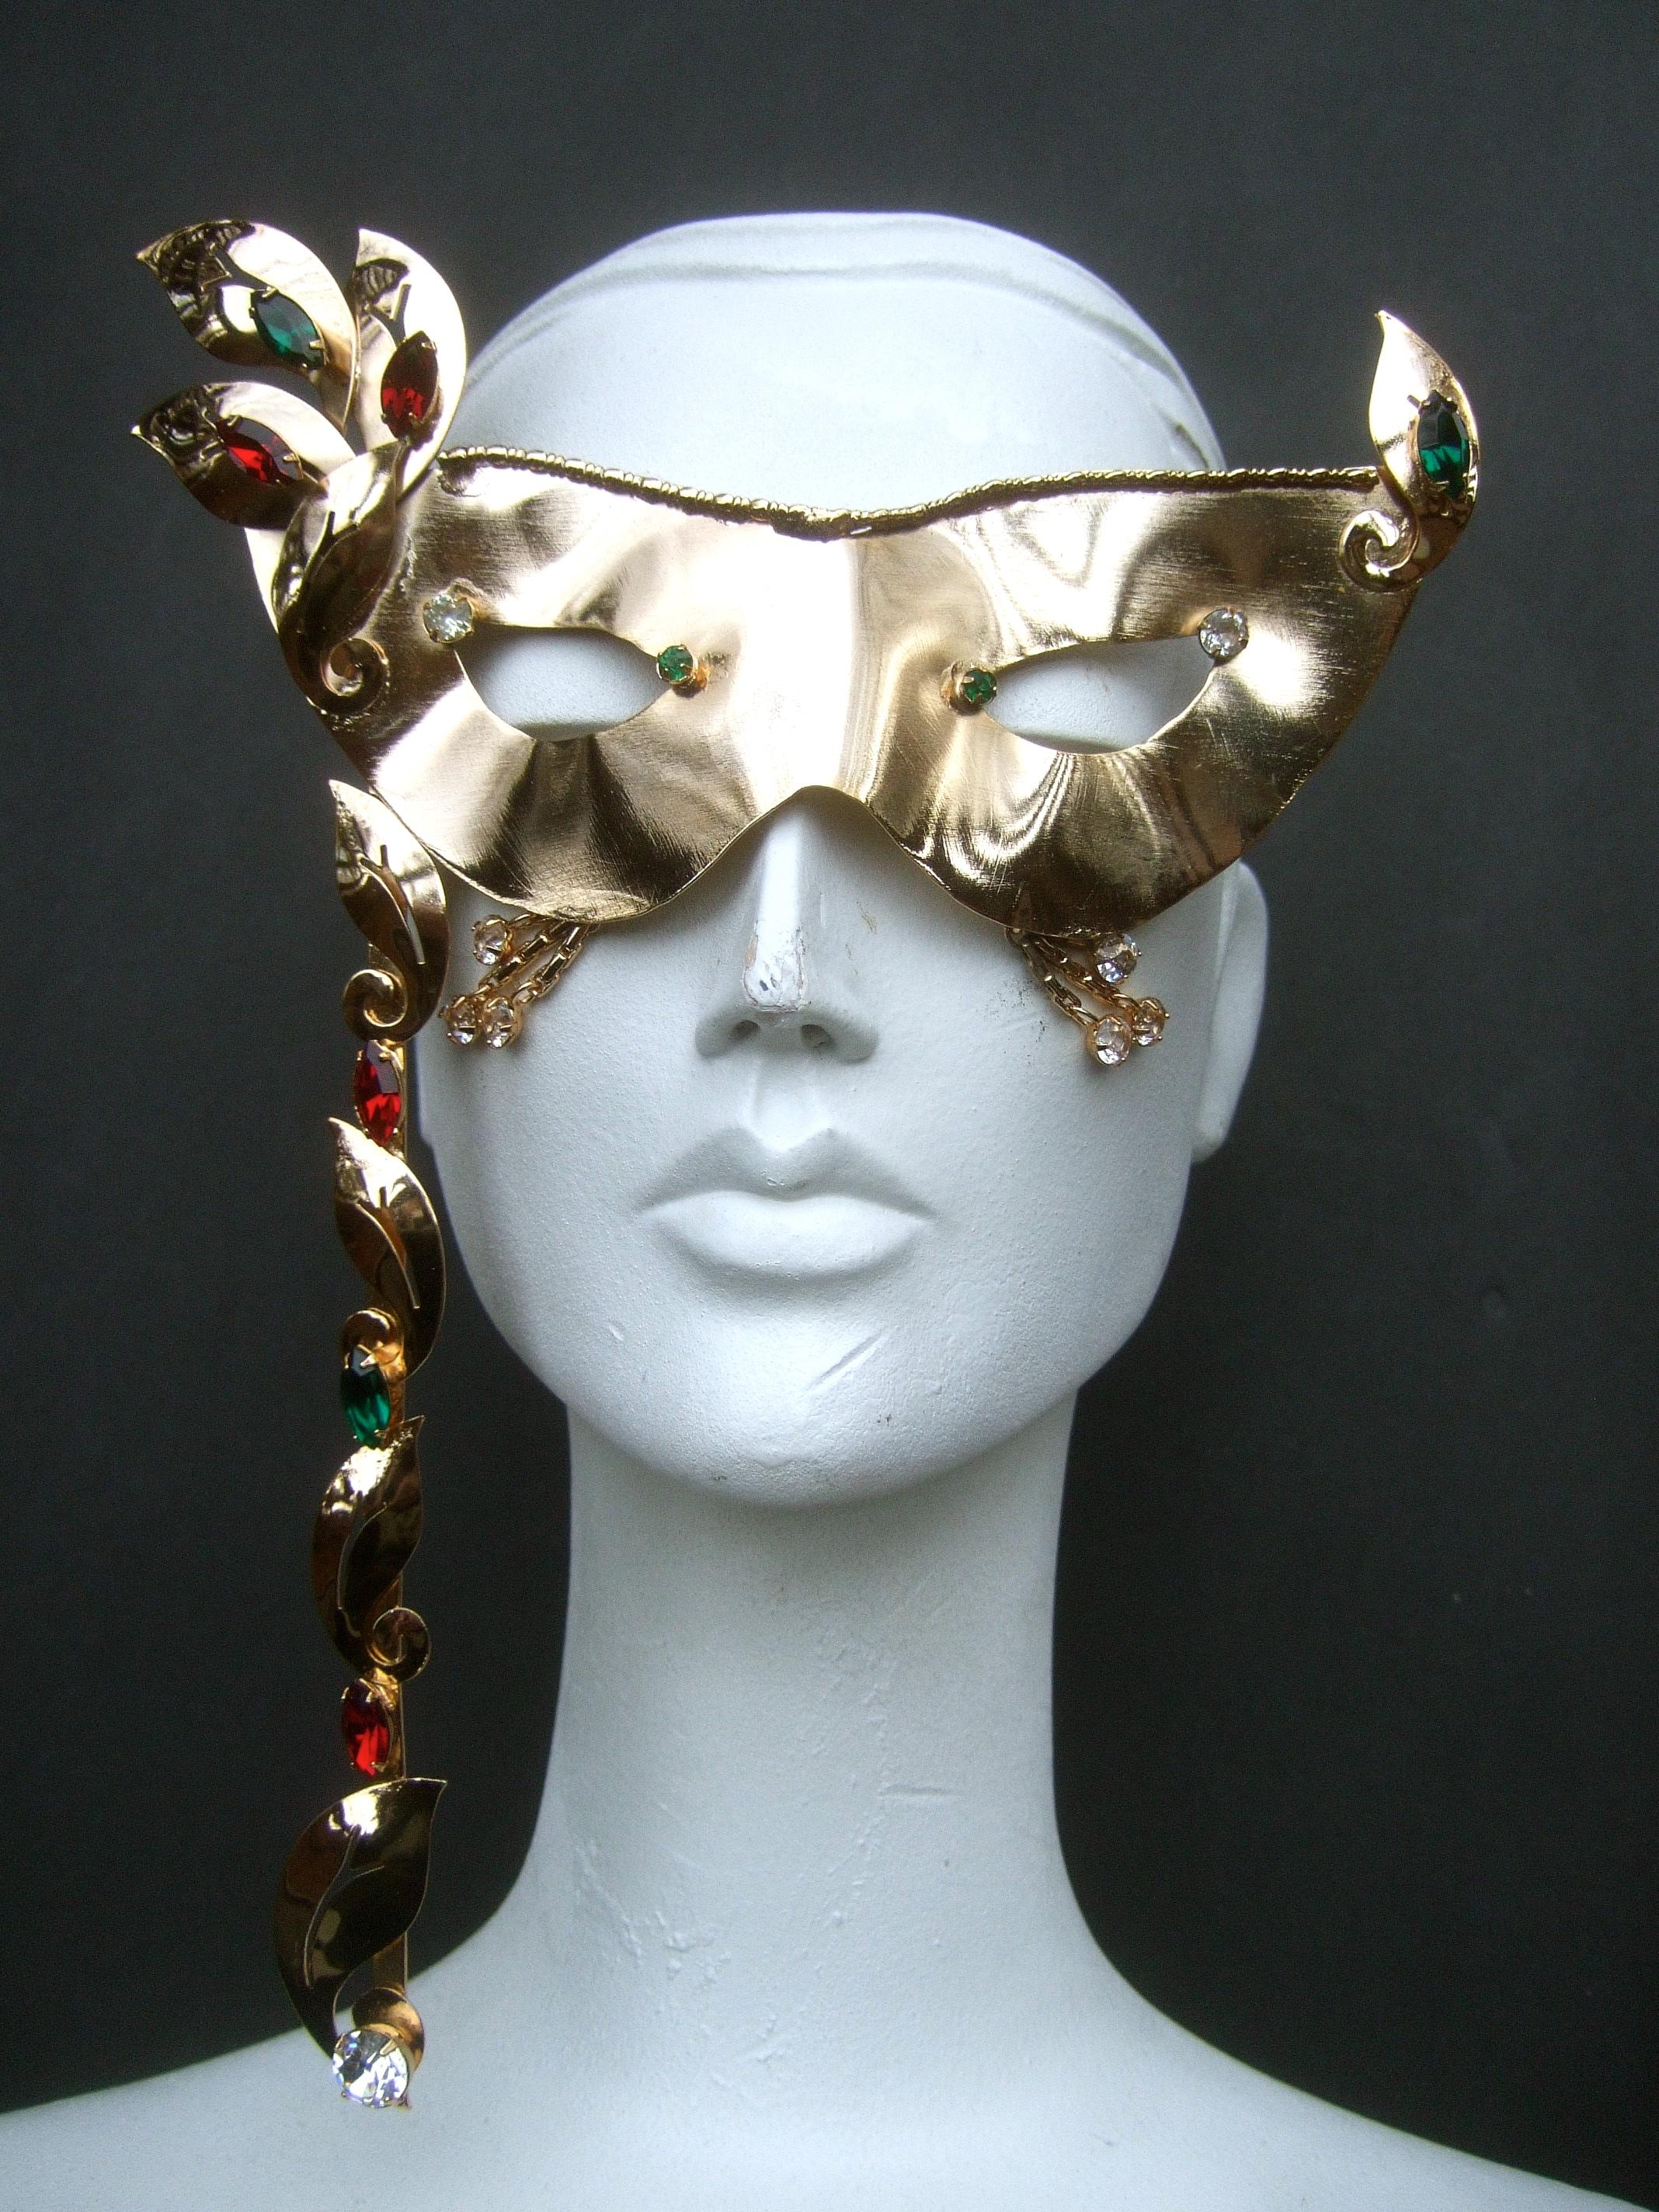 Rare Limited Edition Gilt Metal Mardi Gras Crystal Jeweled Mask by Joseff c 2013 In Excellent Condition For Sale In University City, MO